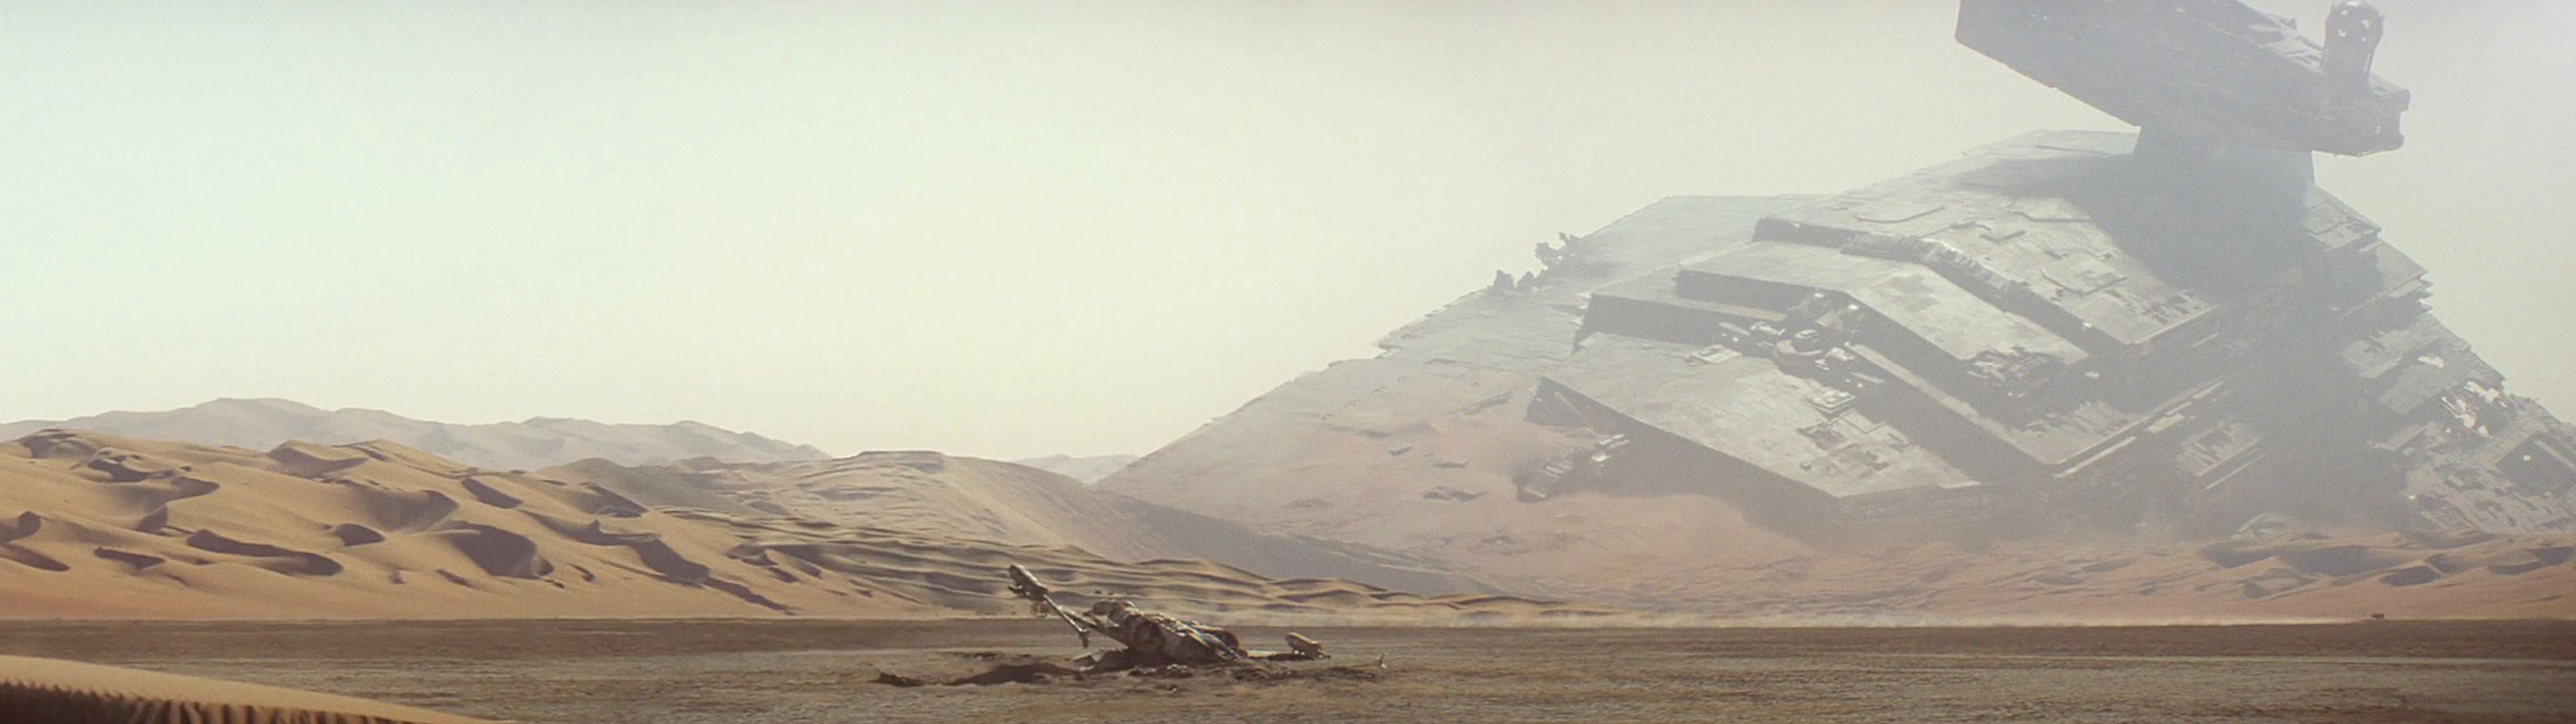 10 Tatooine Star Wars HD Wallpapers and Backgrounds